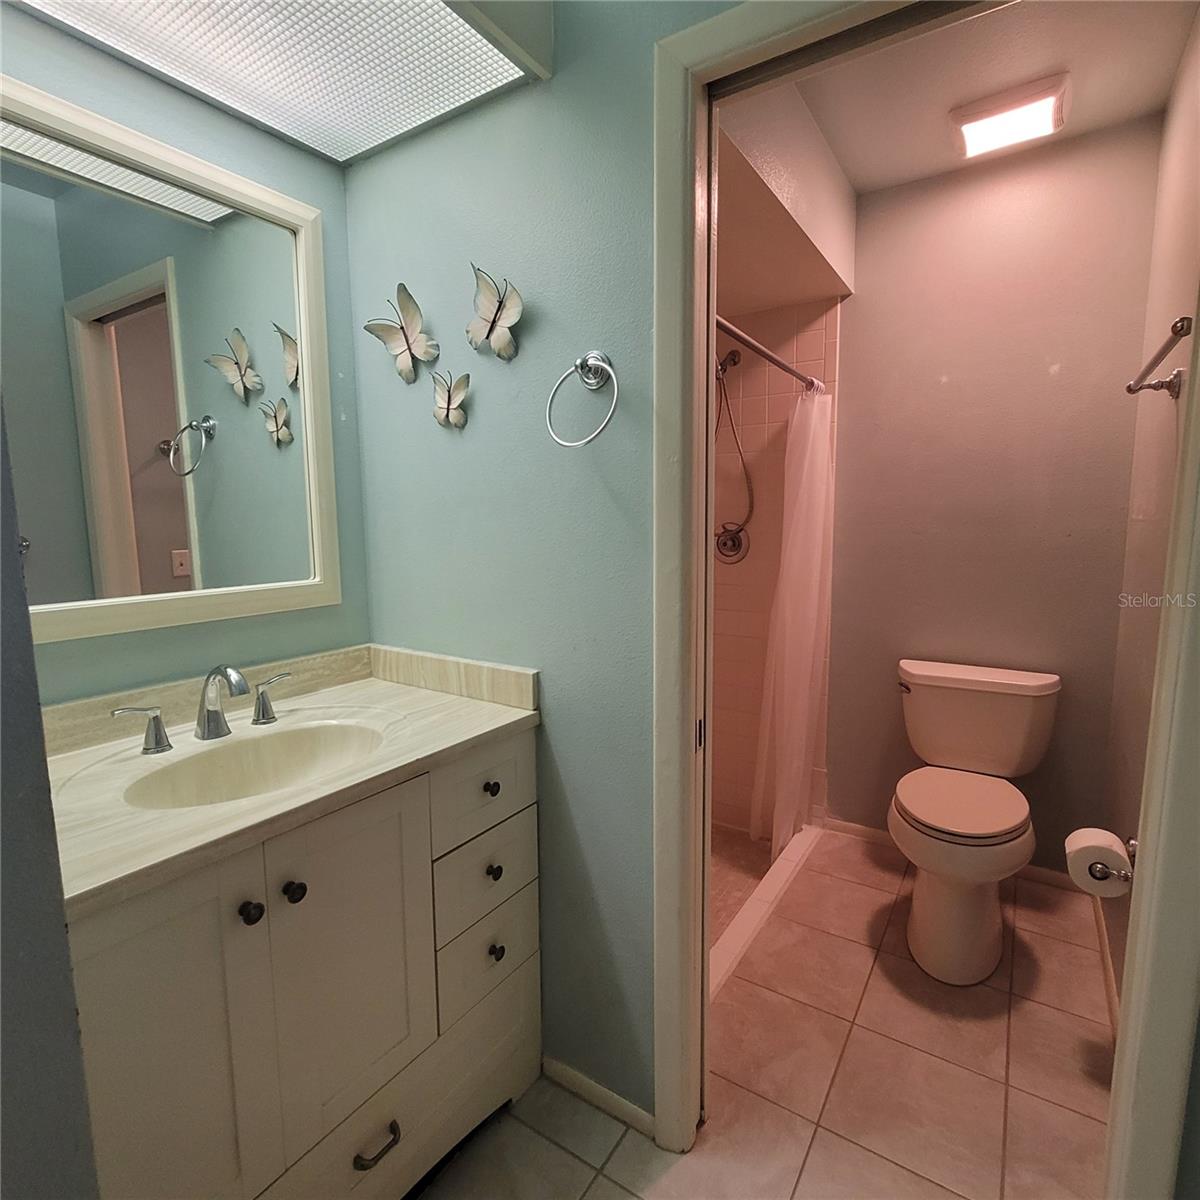 Primary Bathroom has a sliding door that offers privacy from the dressing area